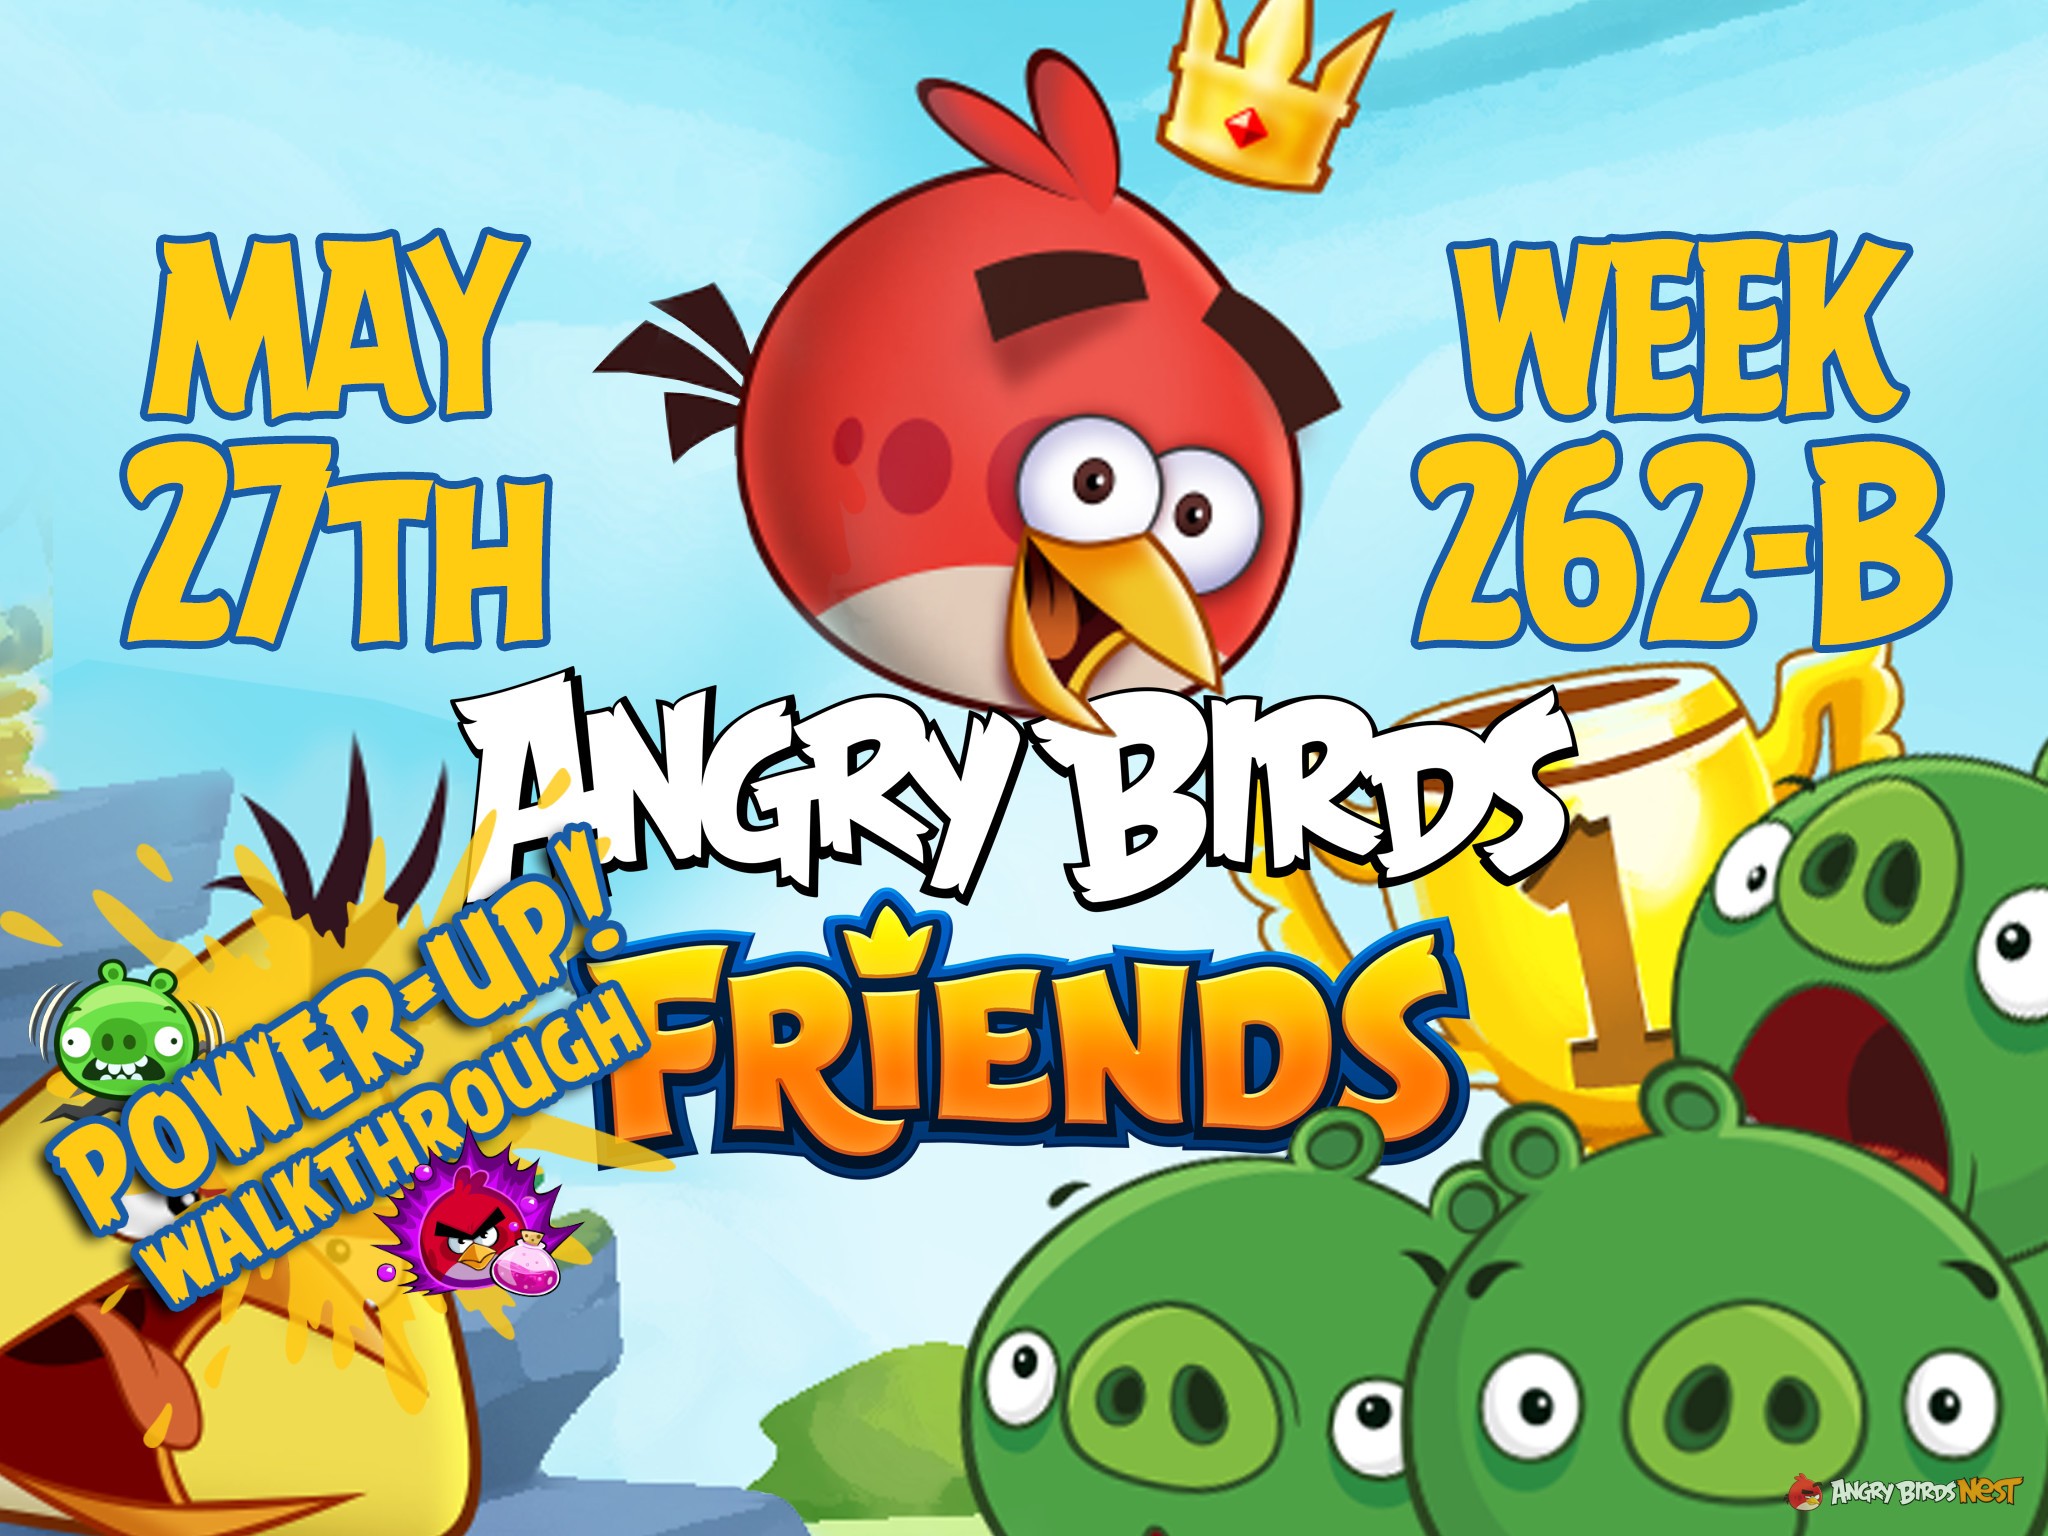 Angry Birds Friends Tournament Week 262-B Feature Image PU